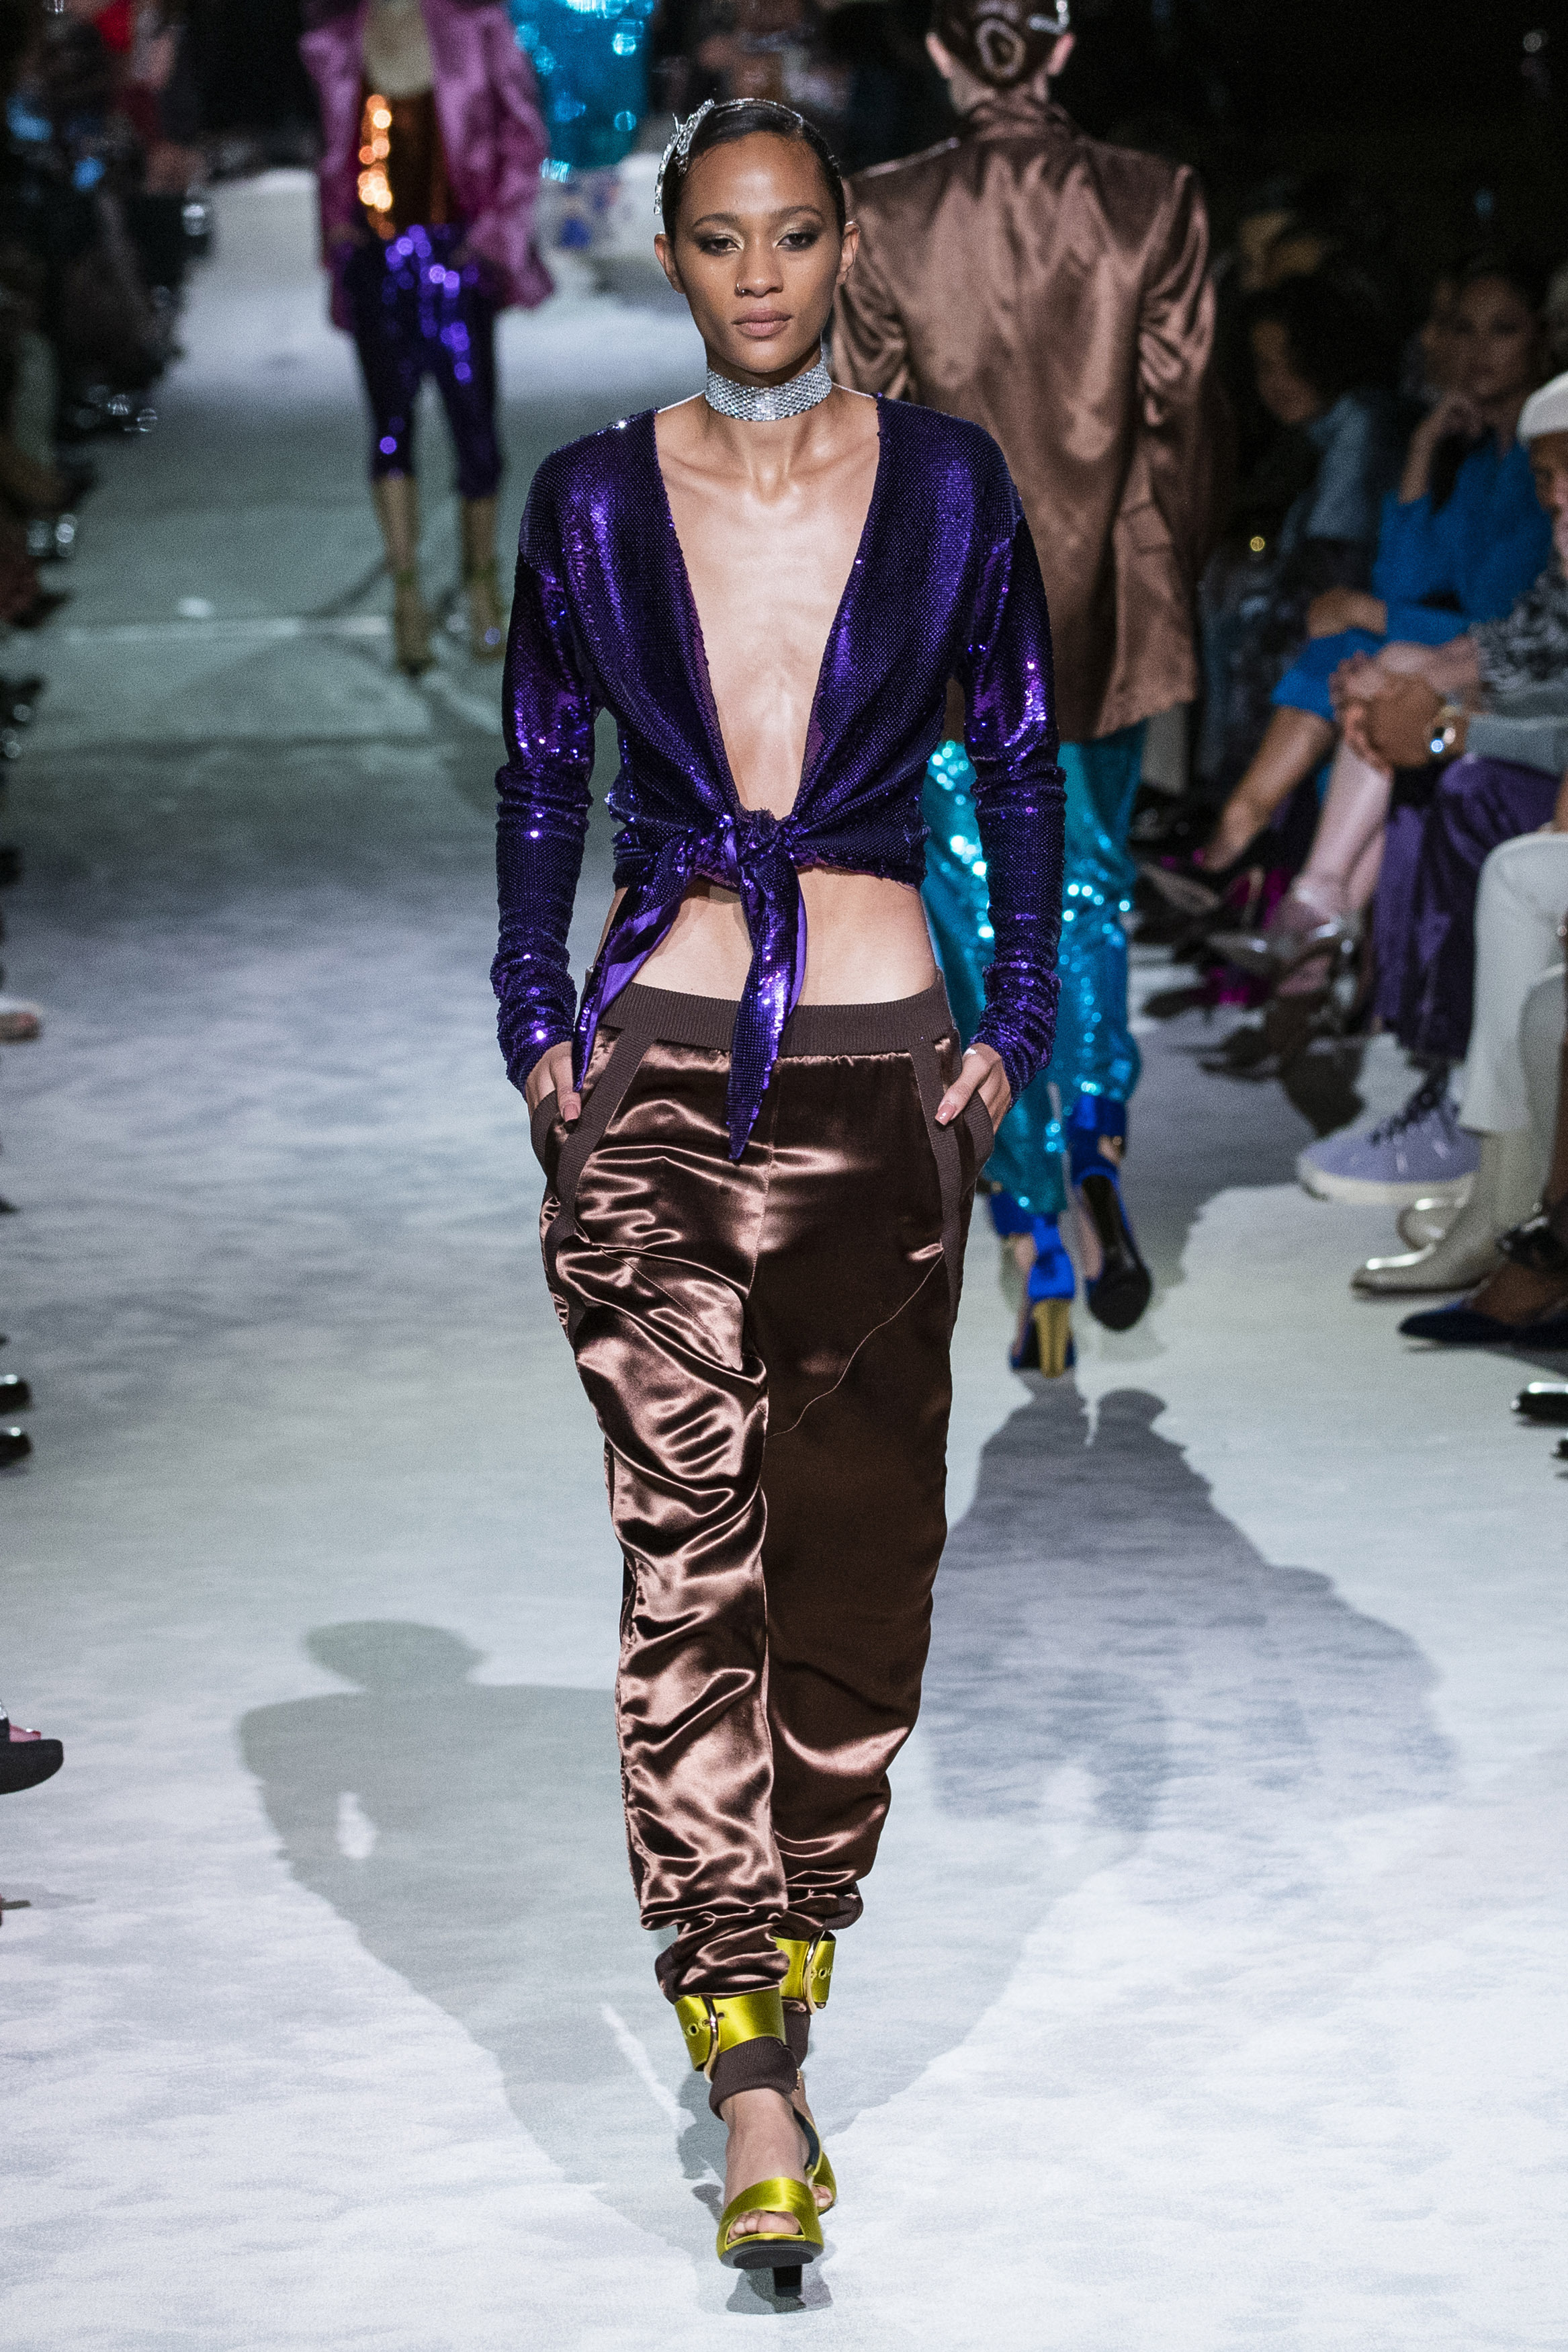 Tom Ford Wraps NY Fashion Week With a Show of Disco Glam - Bloomberg